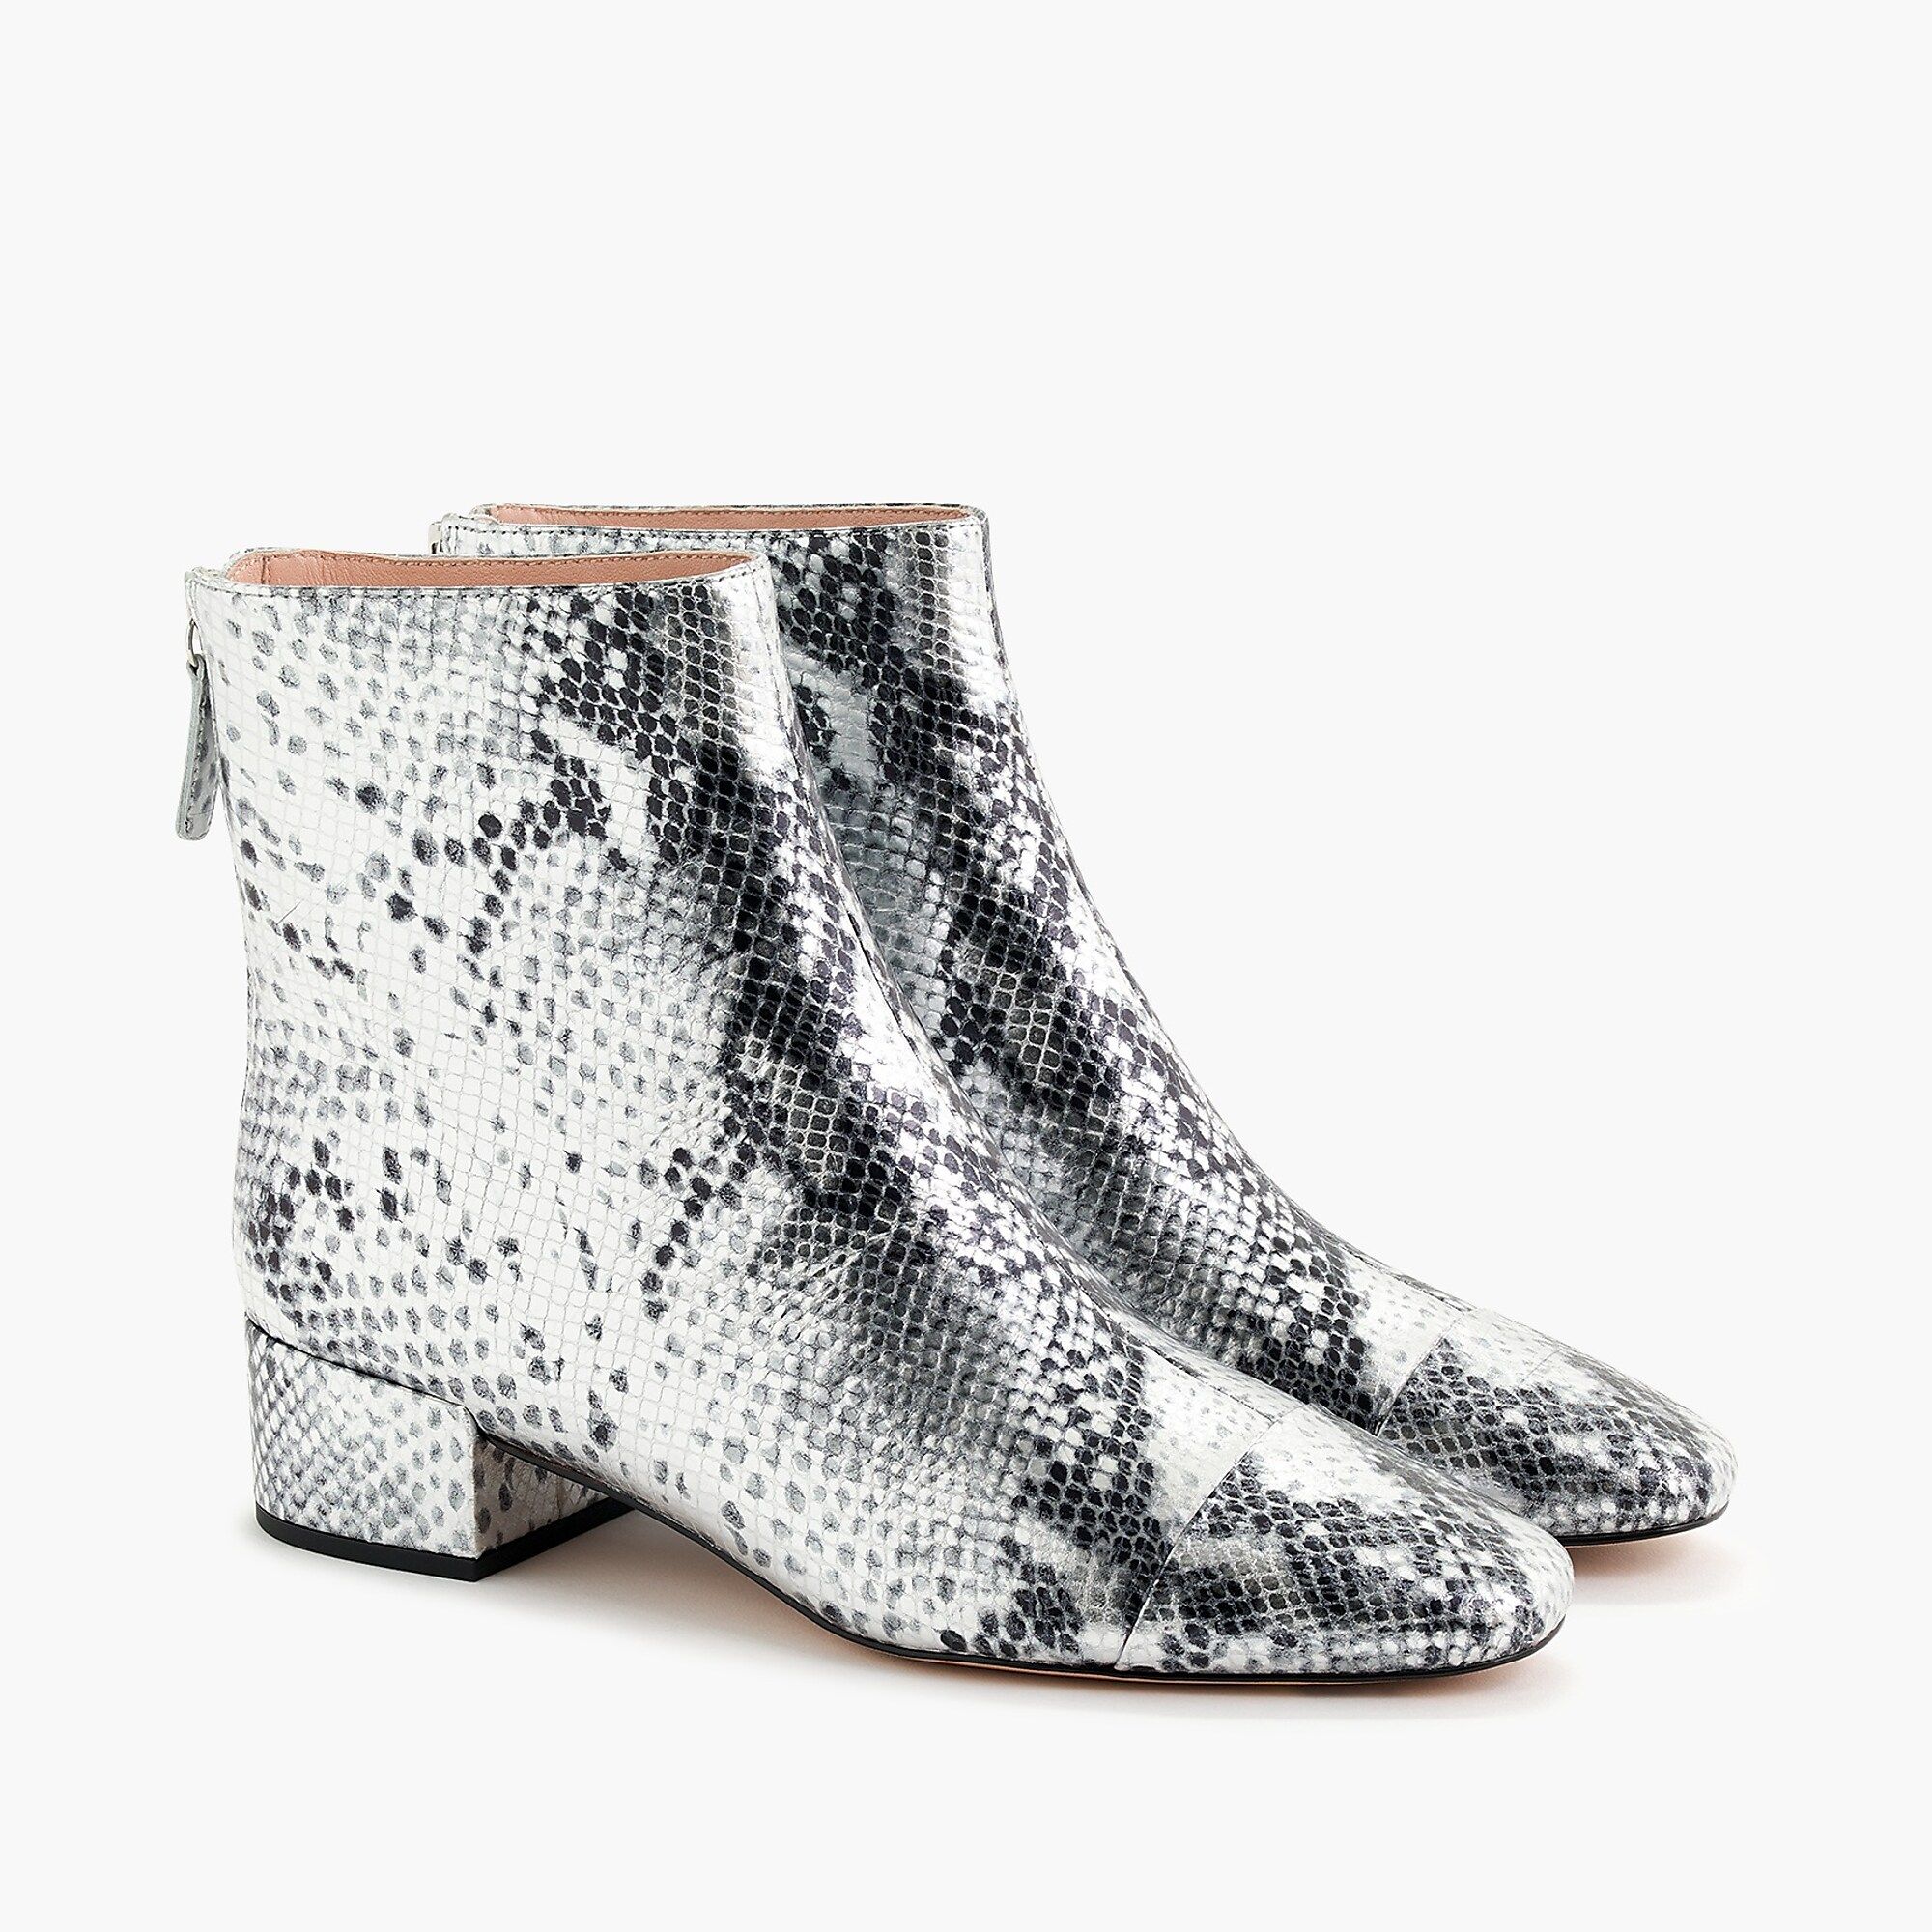 Roxie cap-toe ankle boots in metallic snake-embossed leather | J.Crew US